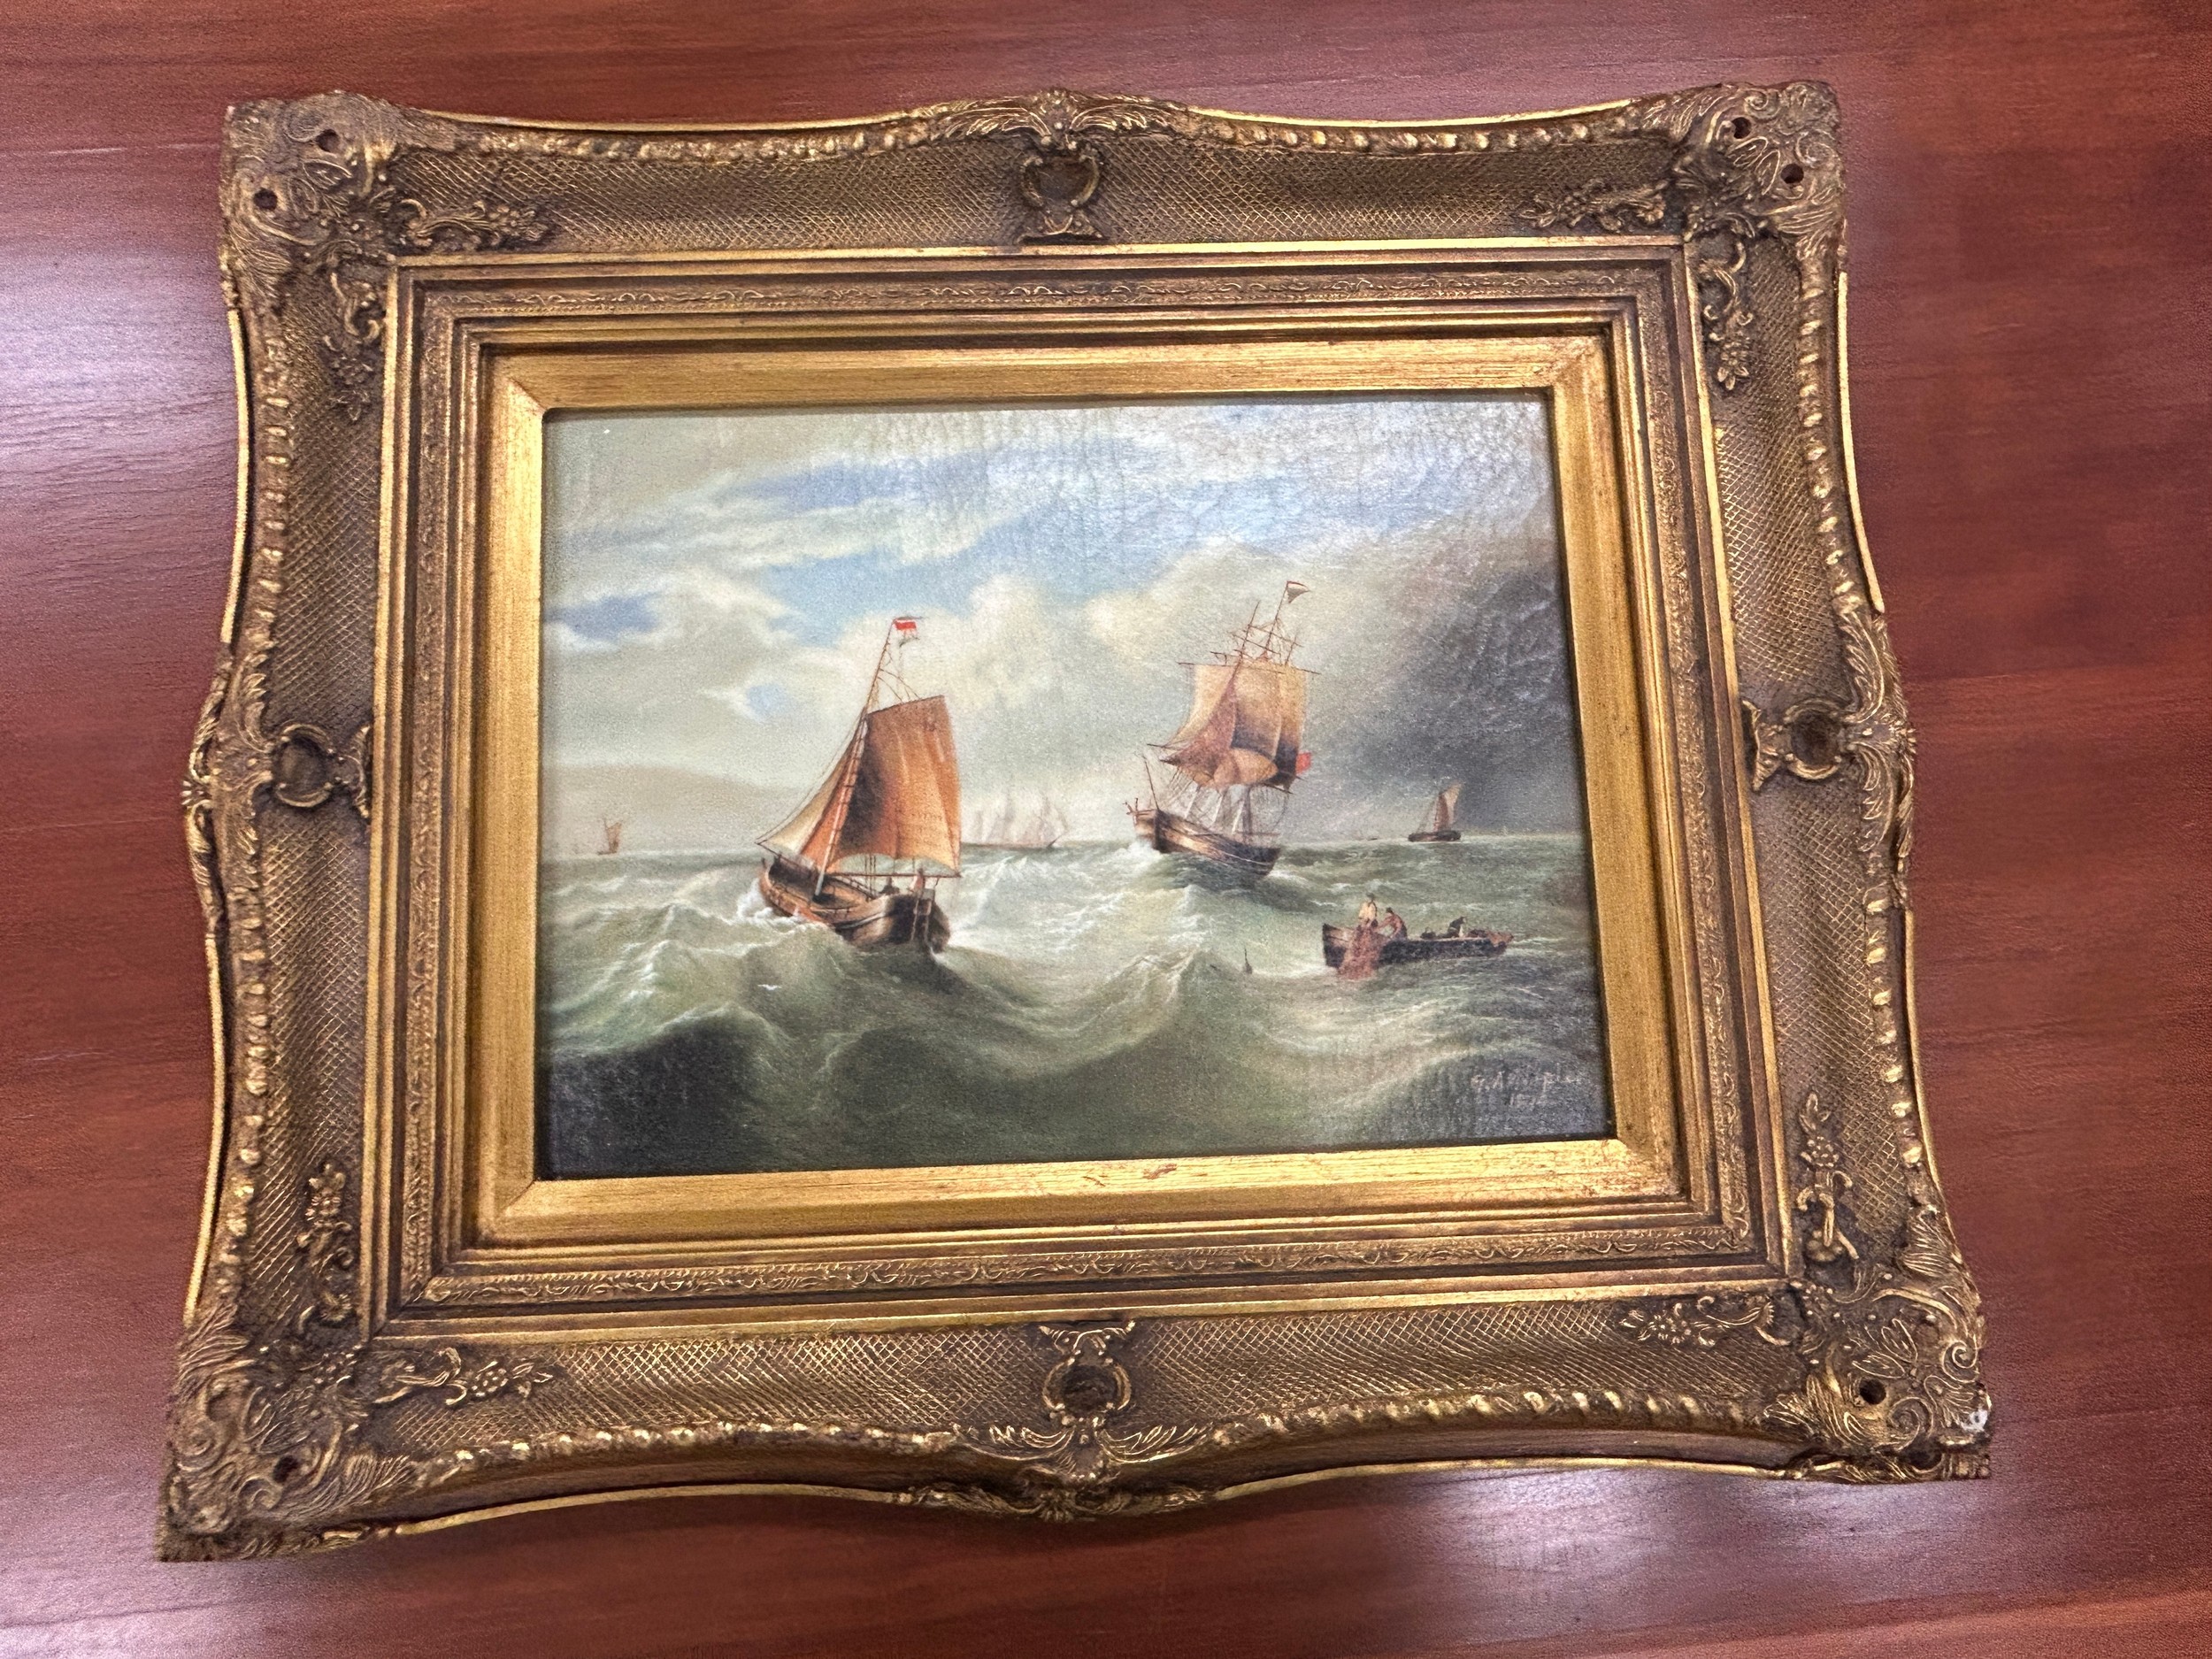 Gilt framed oil on boards depicting gallions measures approximately 24 inches tall 19 inches wide - Image 2 of 3